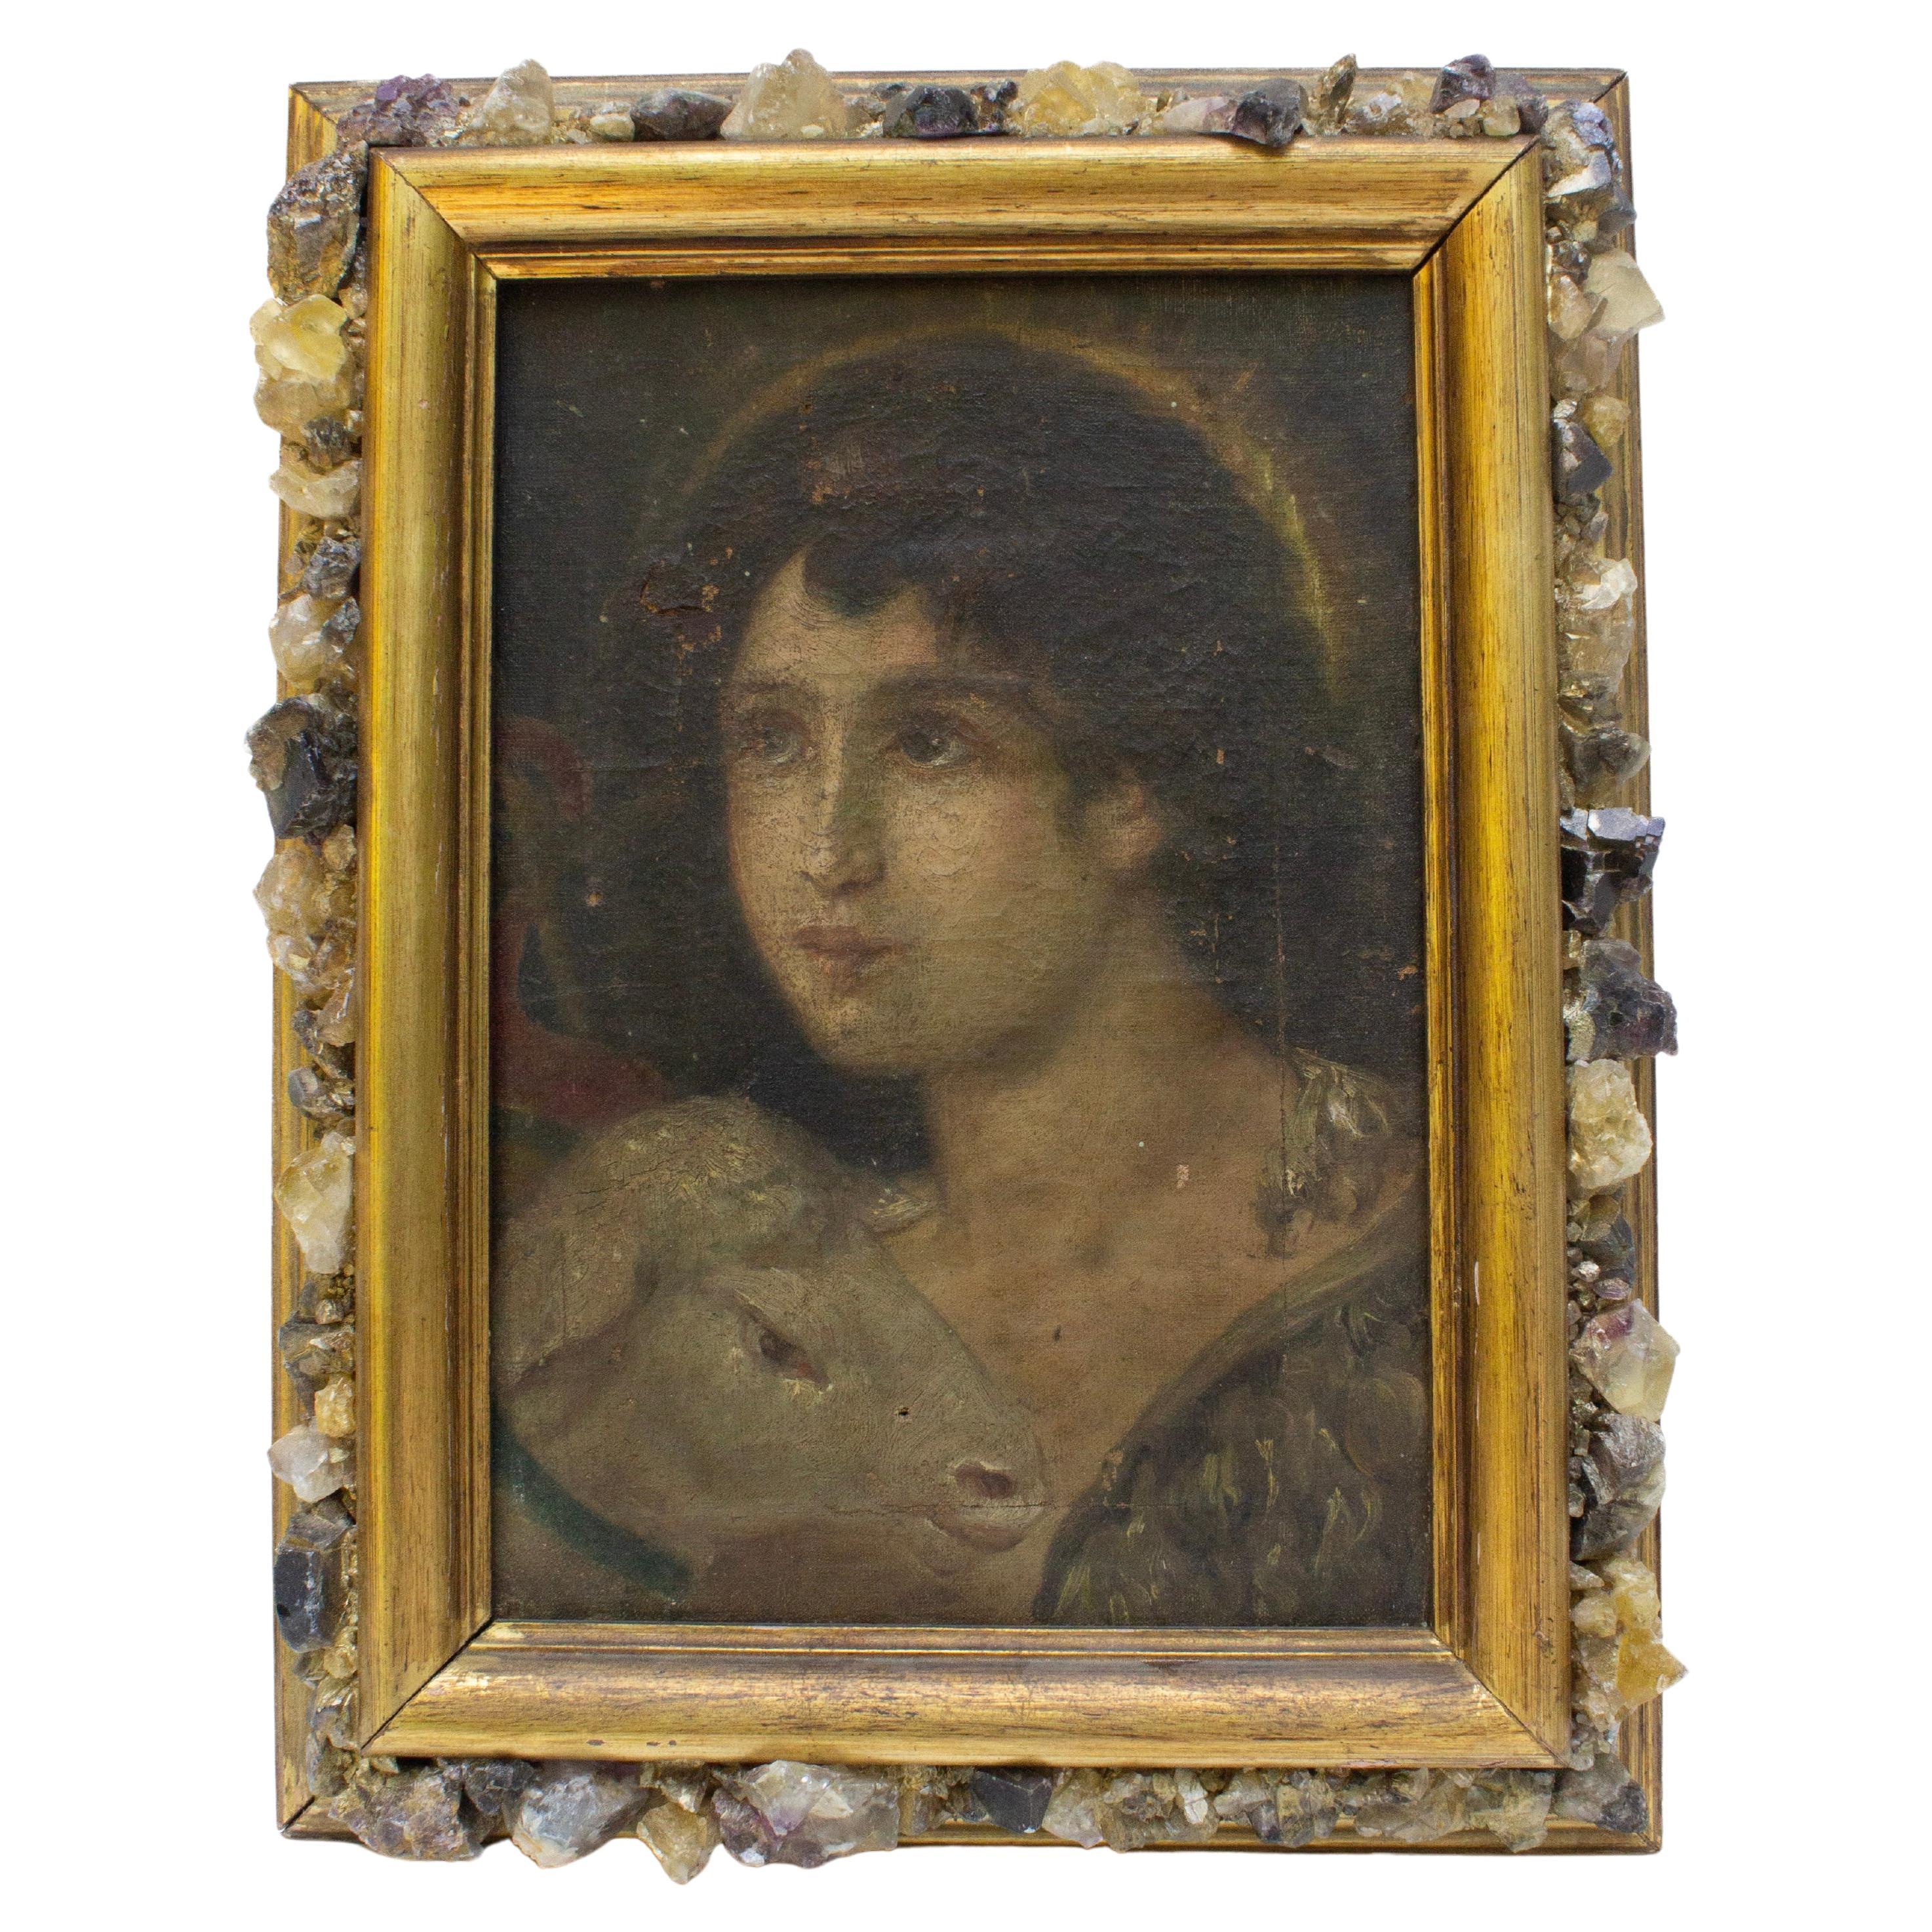 18th Century Italian "Young John the Baptist" Framed in a Fluorite & Gold Frame